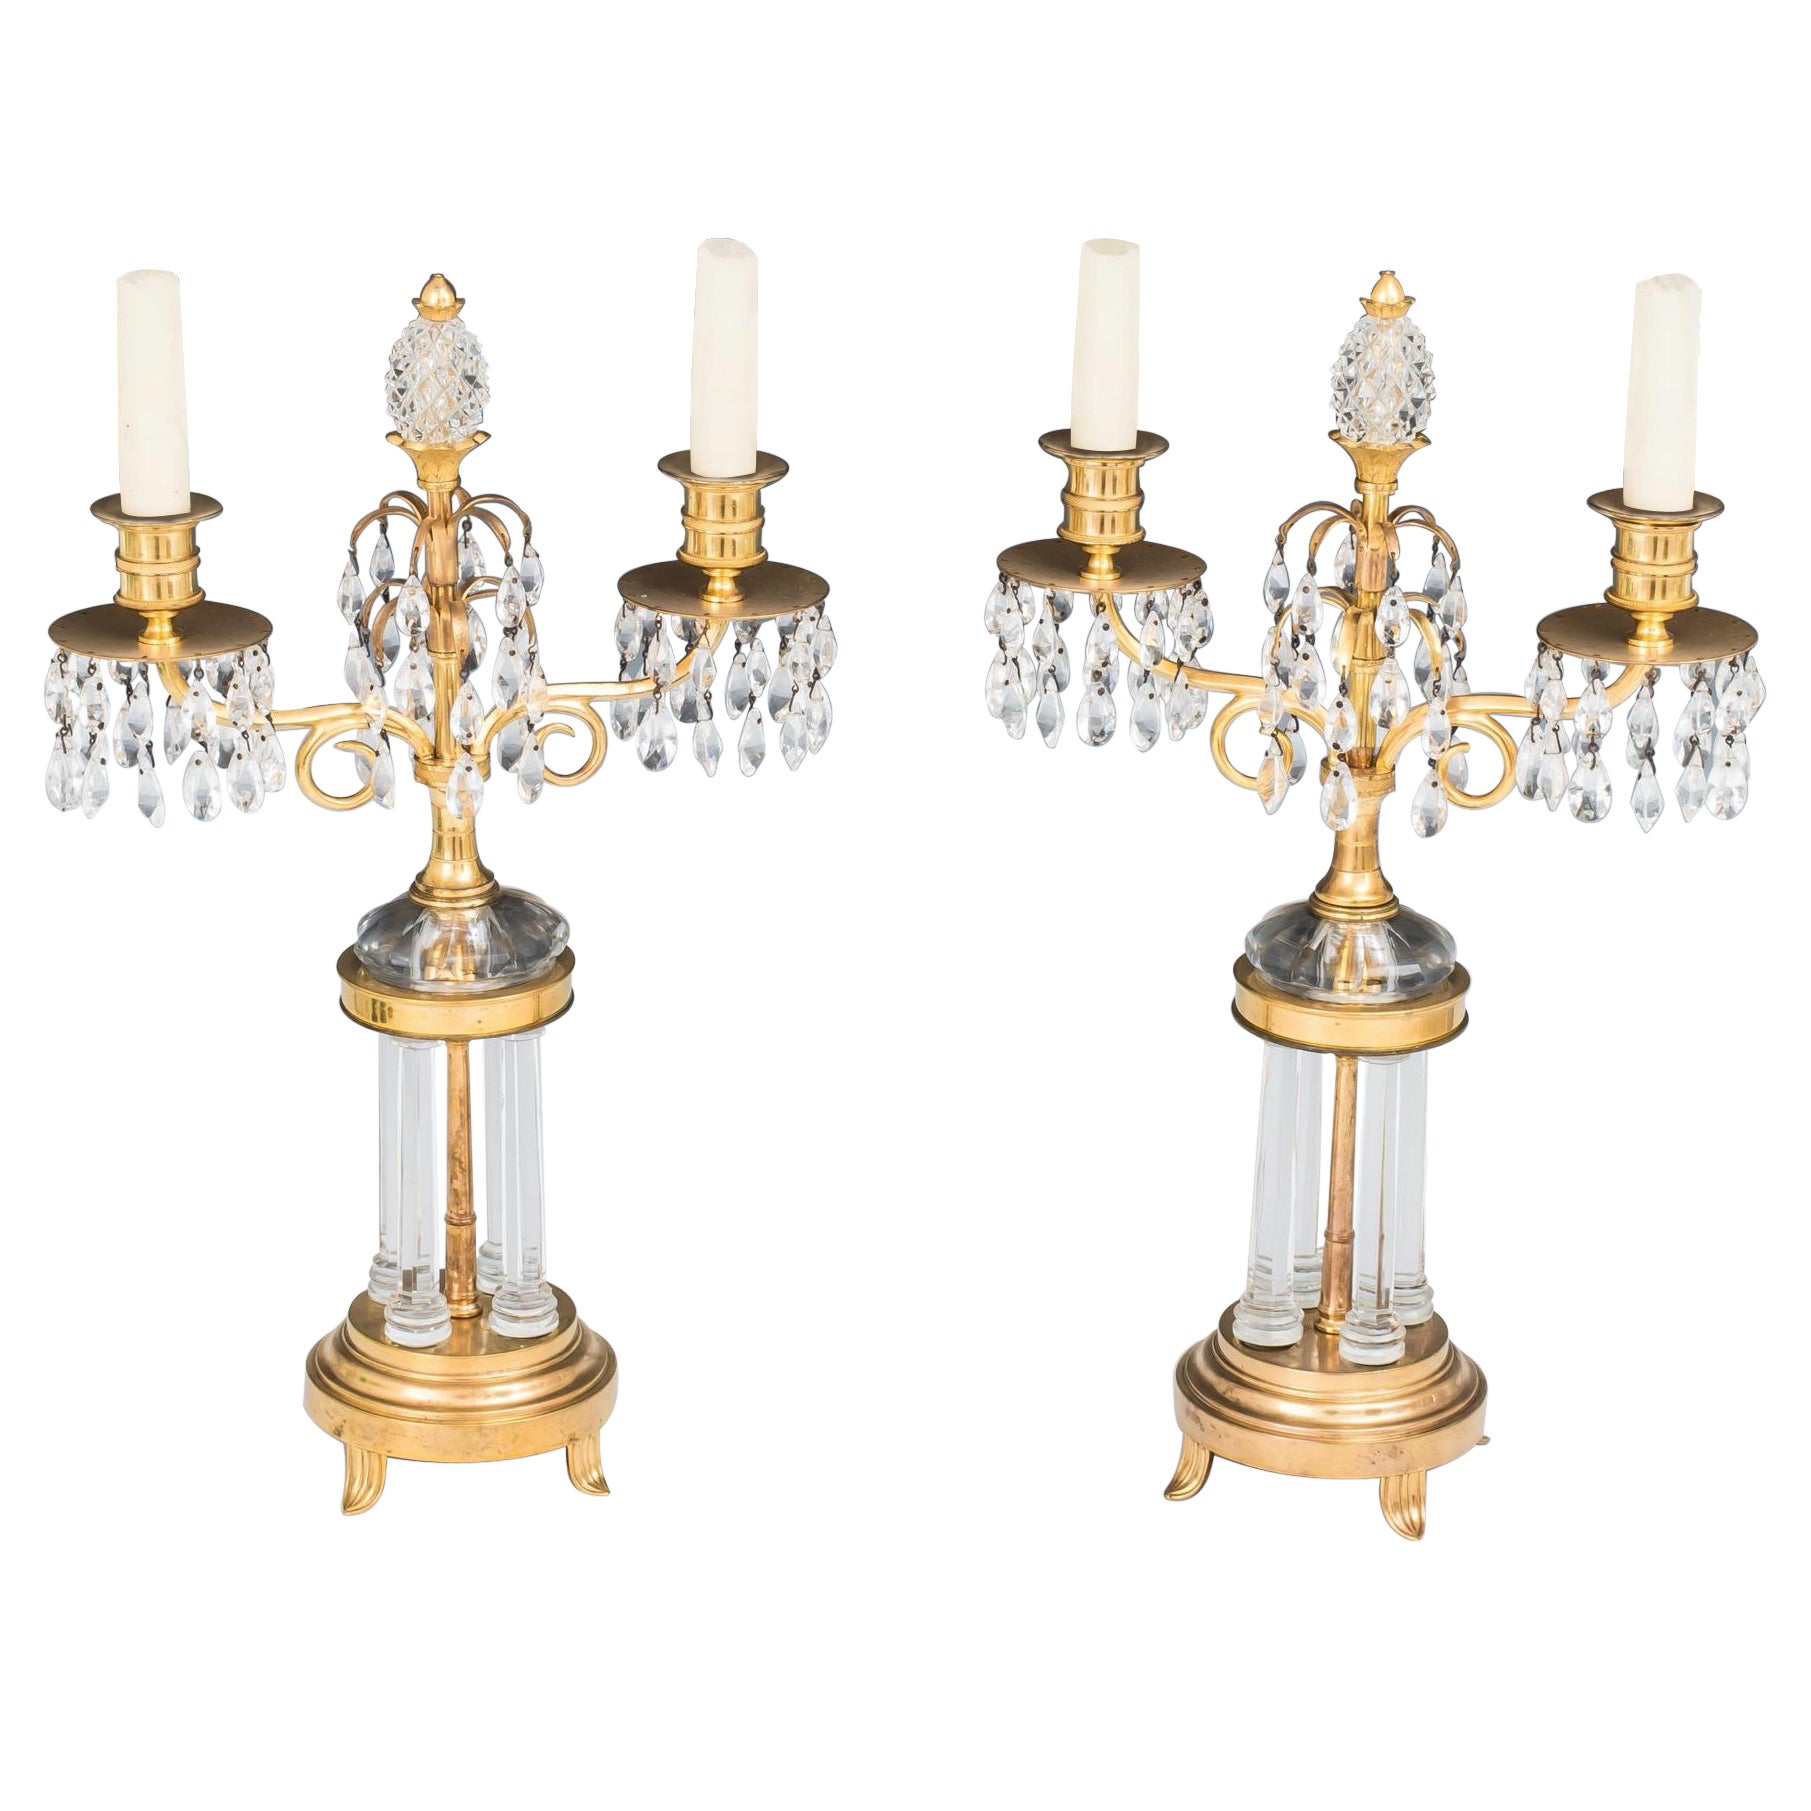 A Pair of Ormolu and Glass Temple Candelabra For Sale